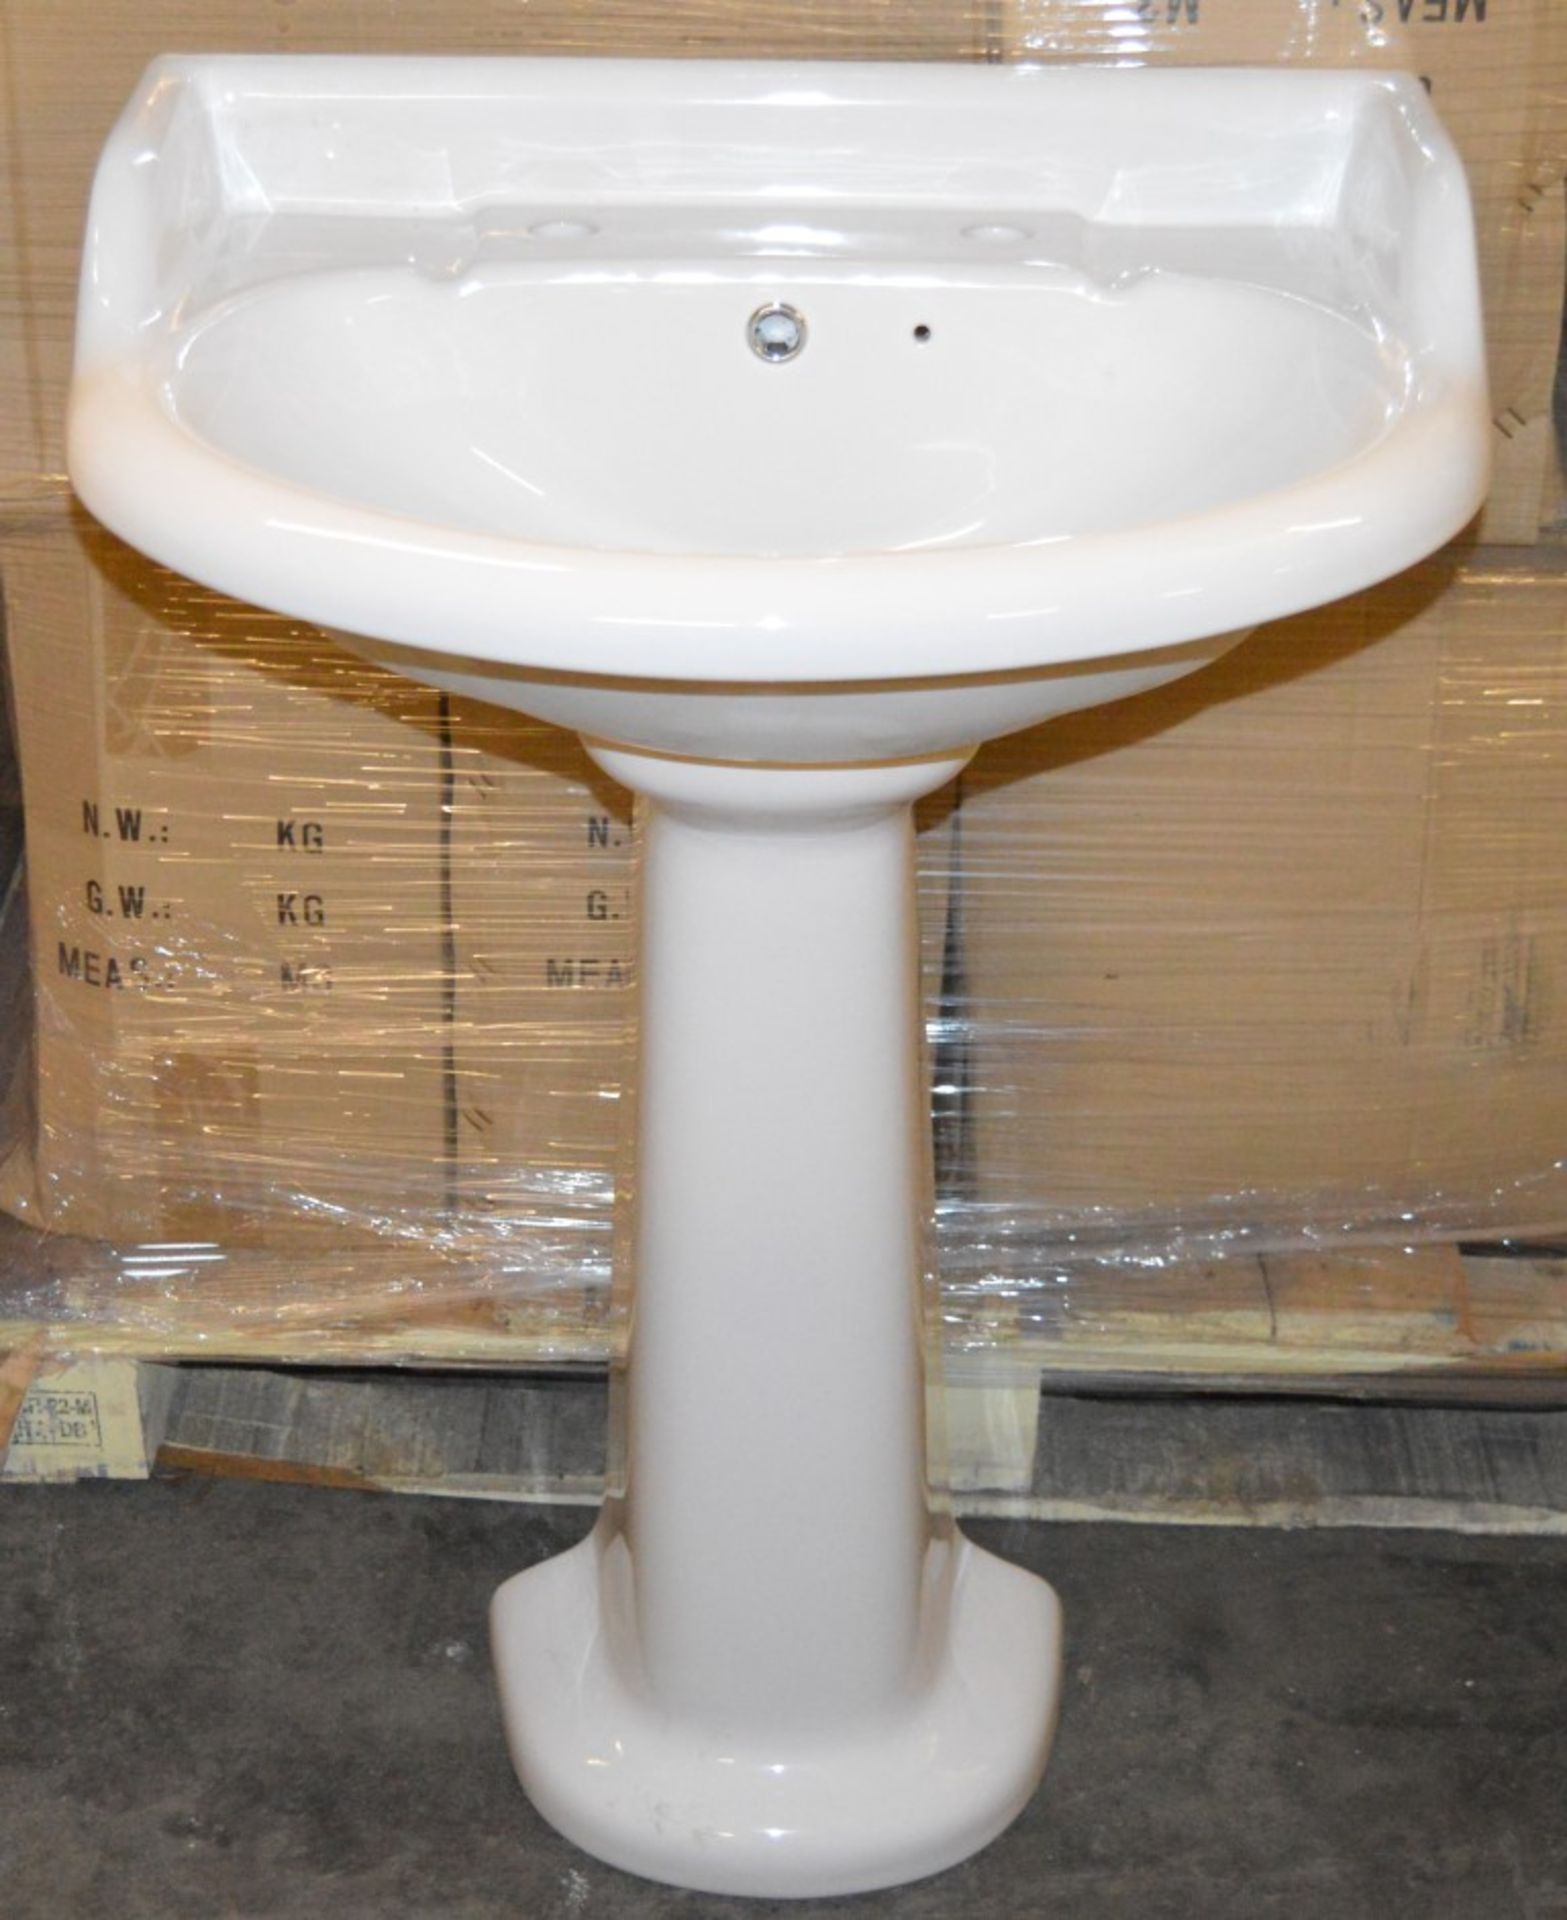 20 x Vogue Bathrooms BELTON Single Tap Hole SINK BASINS With Pedestals - 580mm Width - Brand New - Image 2 of 2